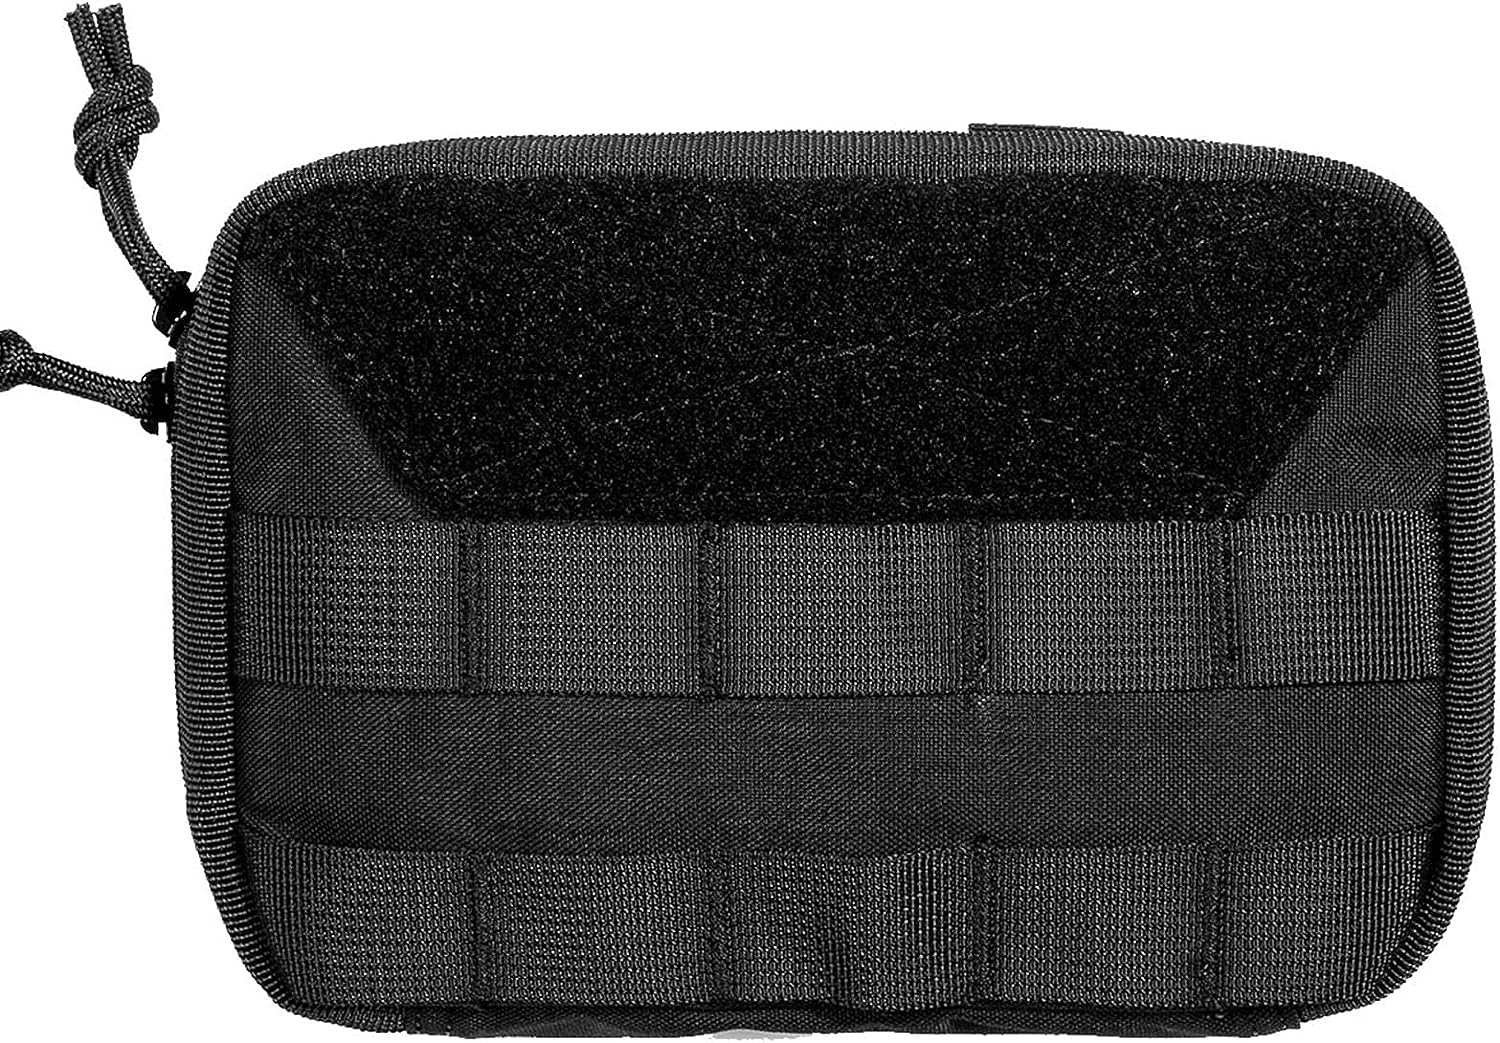 OneTigris Small MOLLE Pouch, Tactical Admin Pouch Belt EDC Tool Organizer Zippered Utility Waist Pack 7.5"x5"x2"